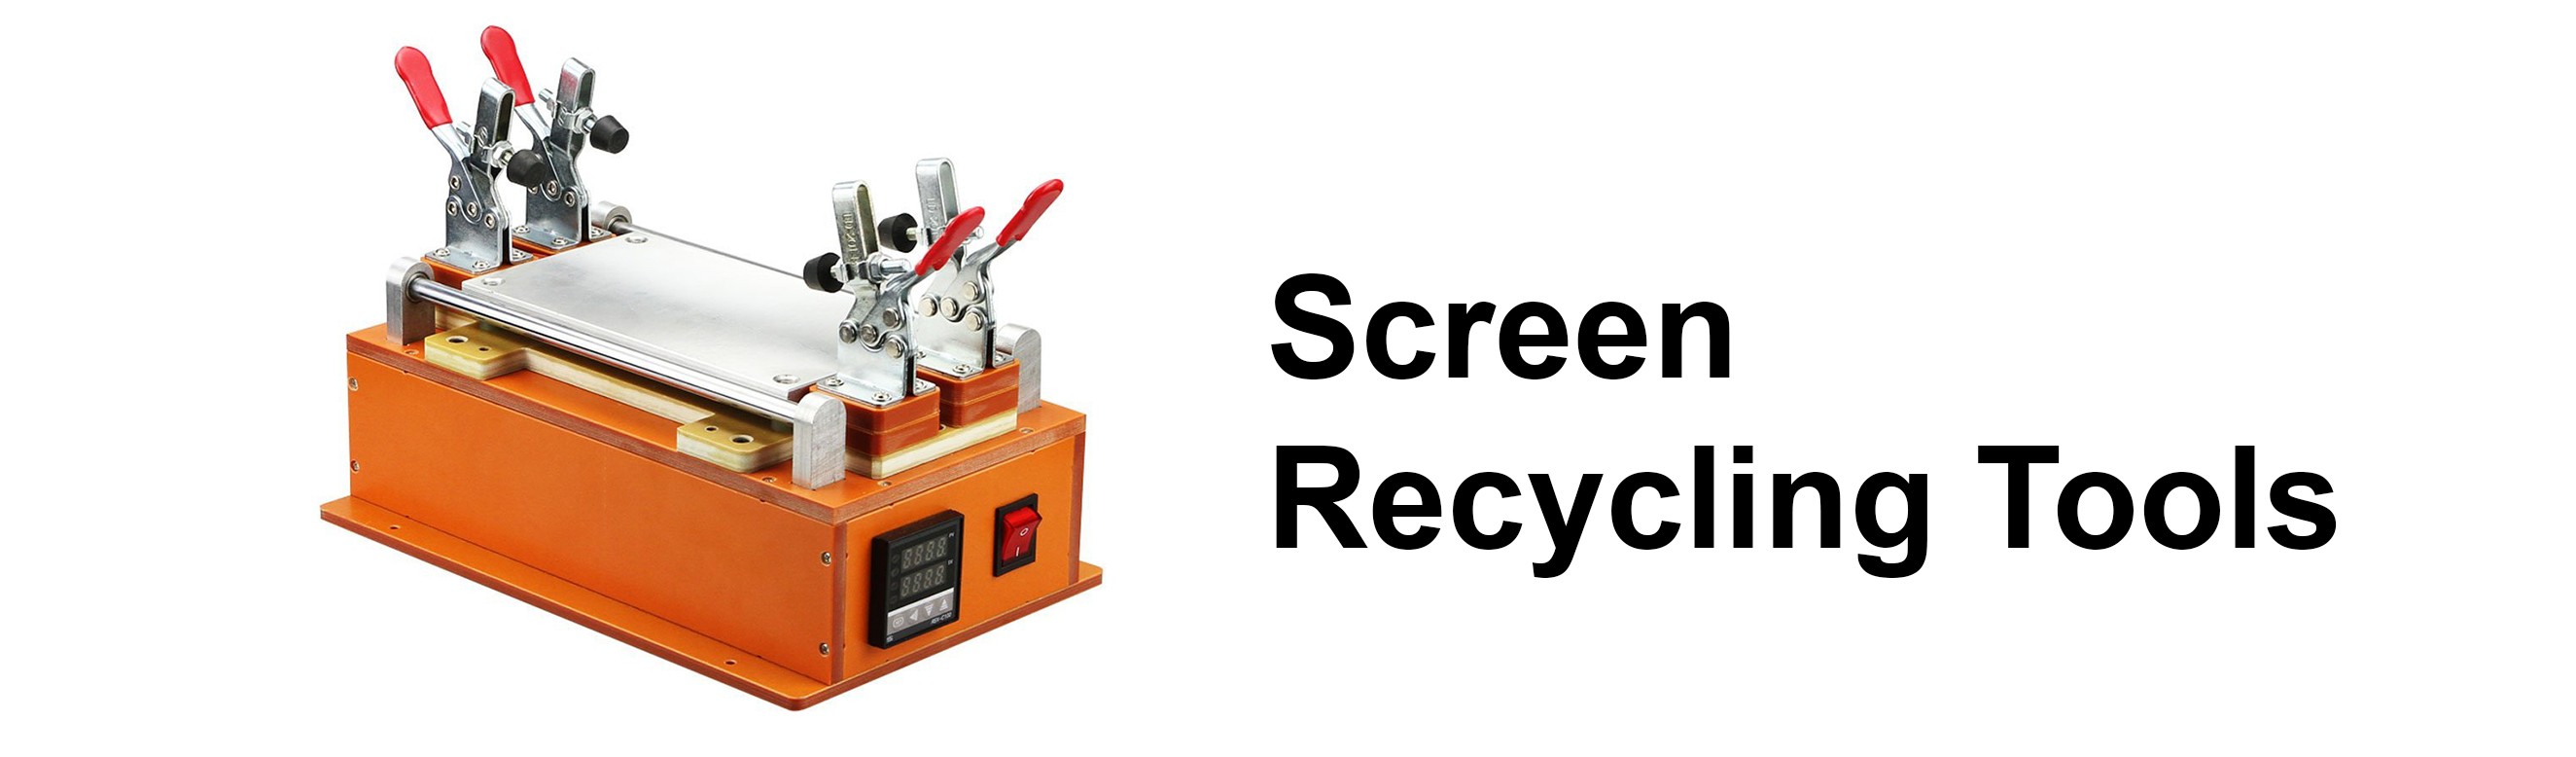 Phone Screen Recycling Tools